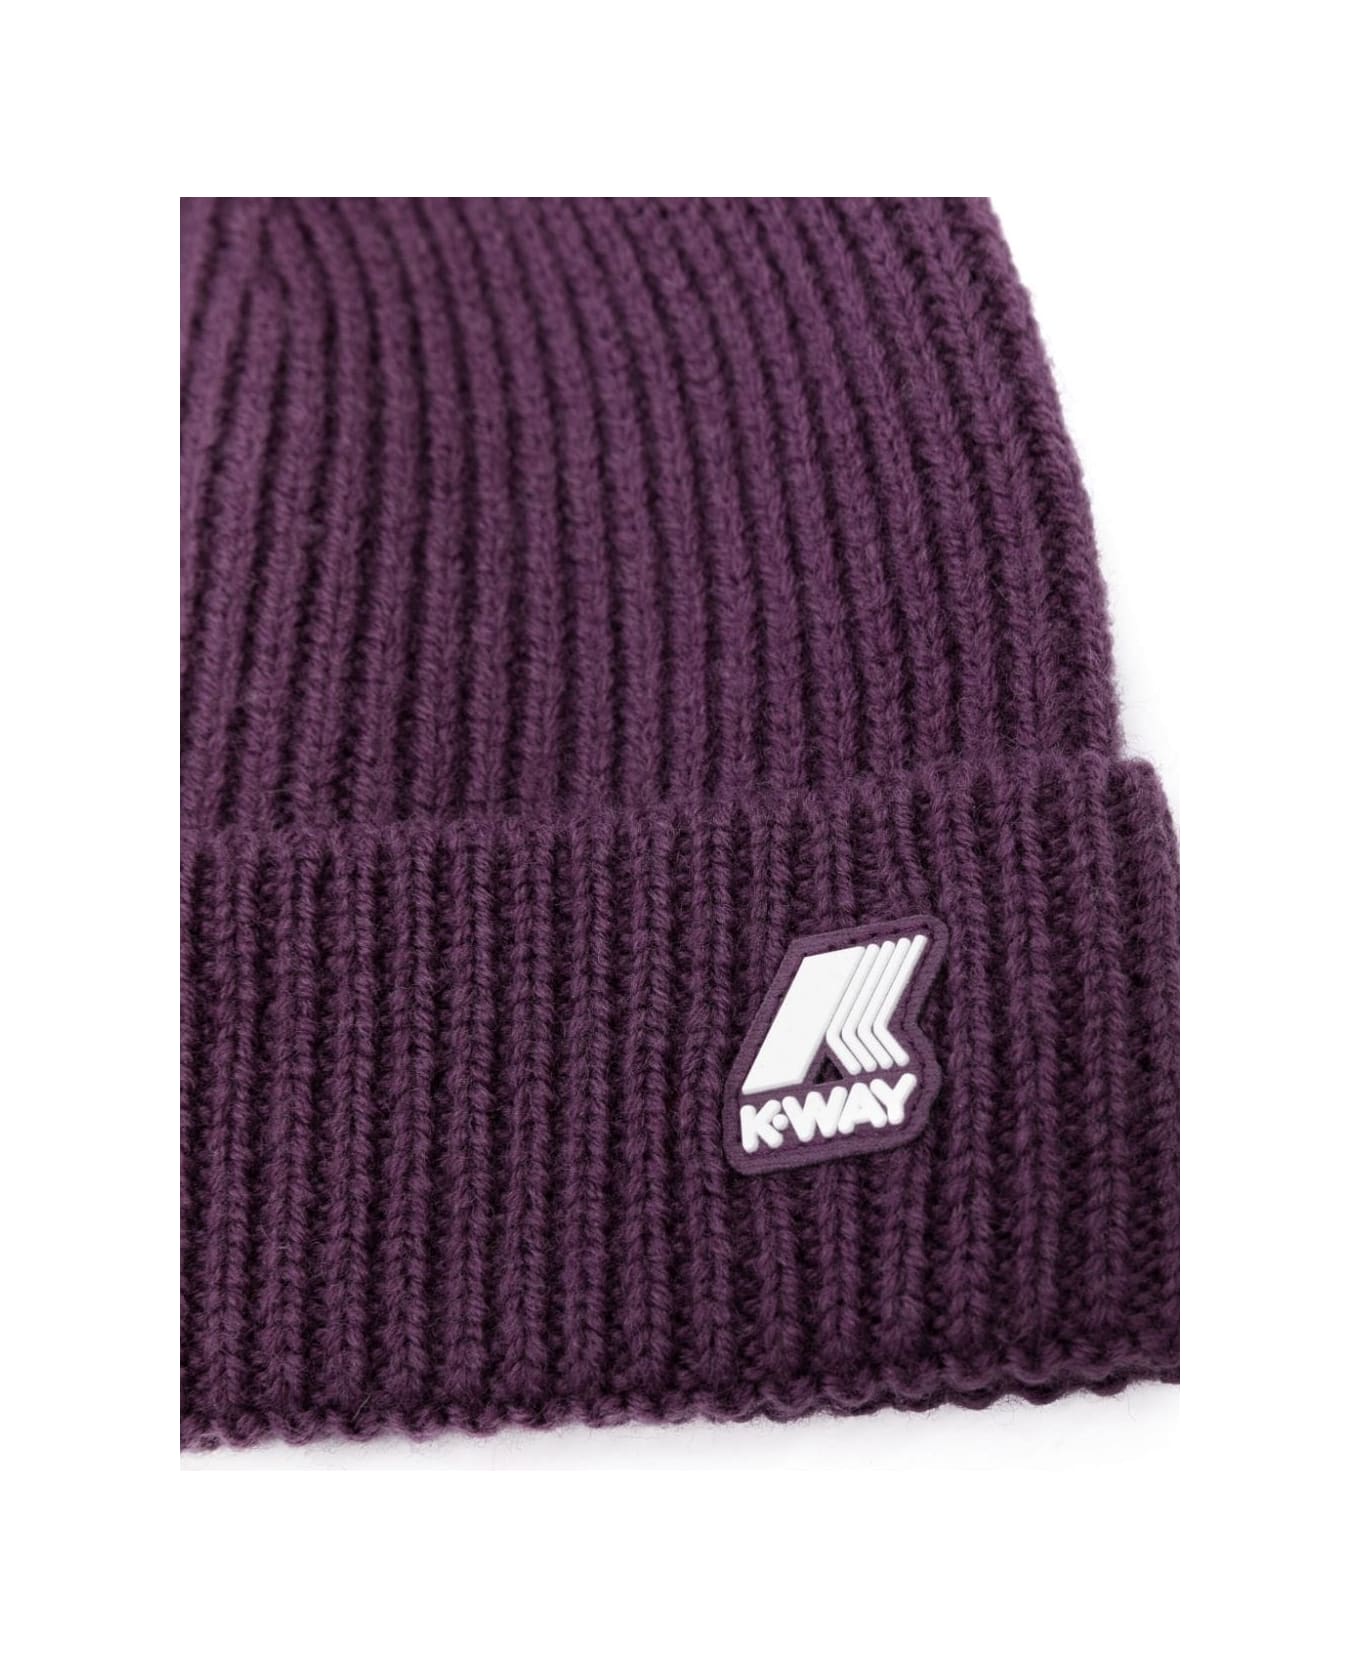 K-Way Beanie With Logo - Violet アクセサリー＆ギフト